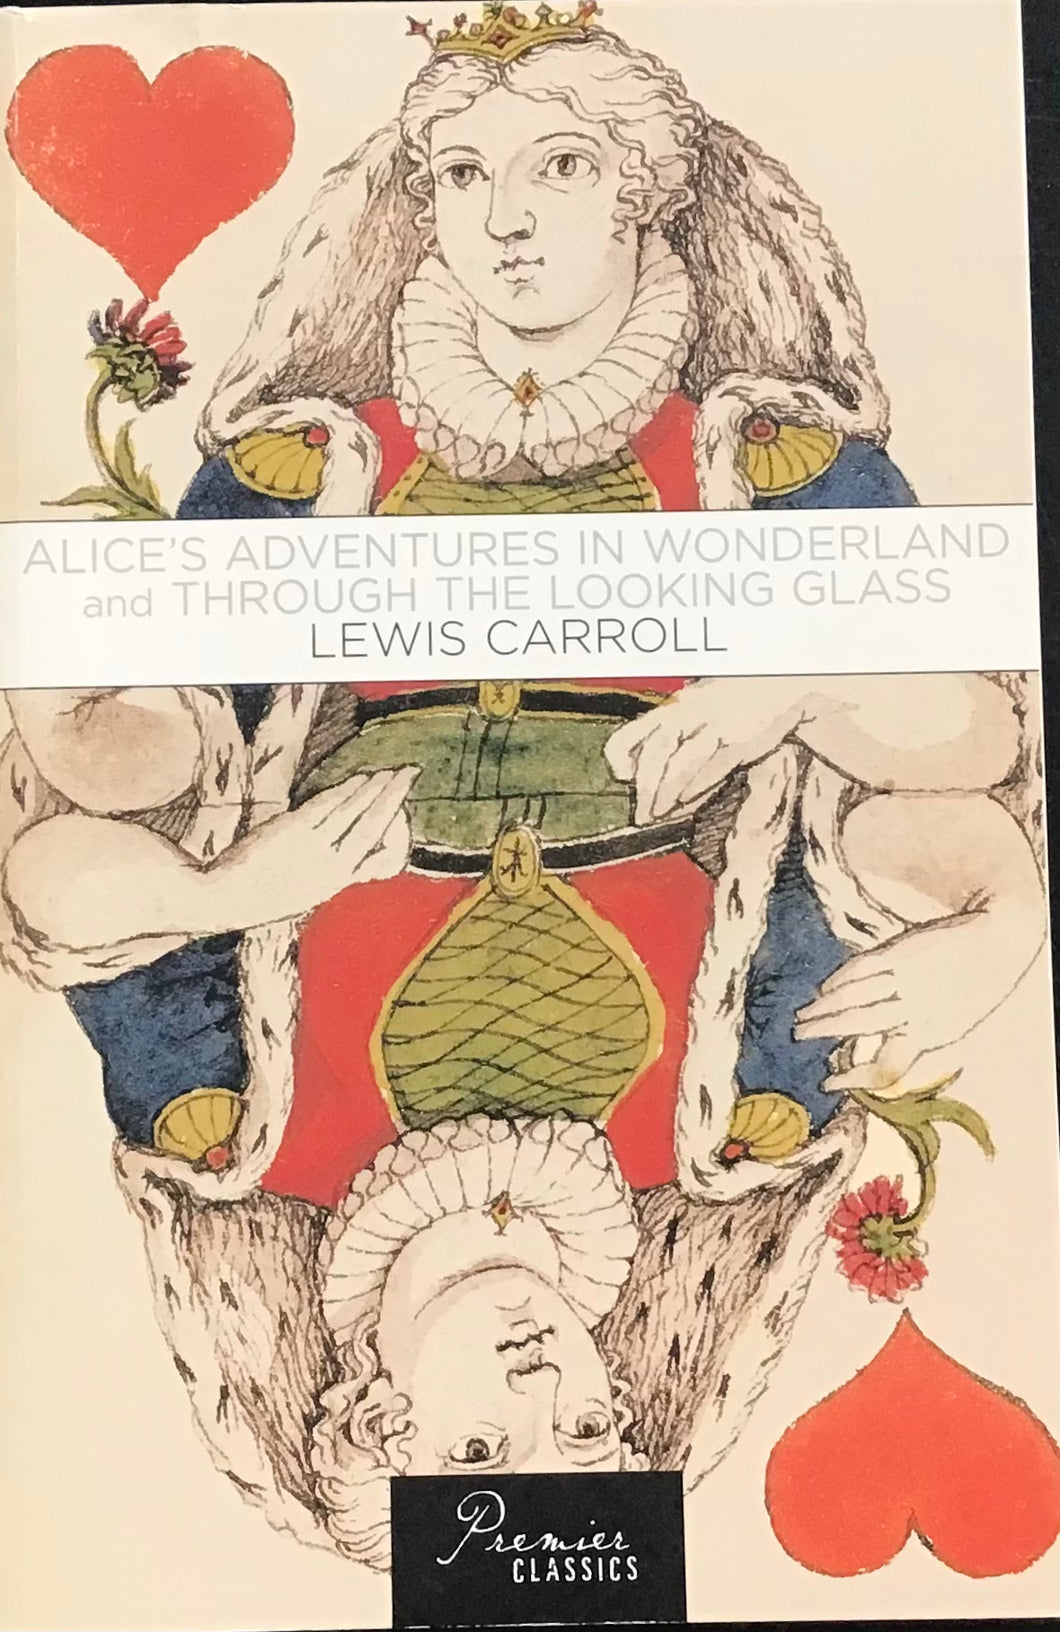 Alice's Adventure in Wonderland and Through the Looking Glass, Lewis Carroll